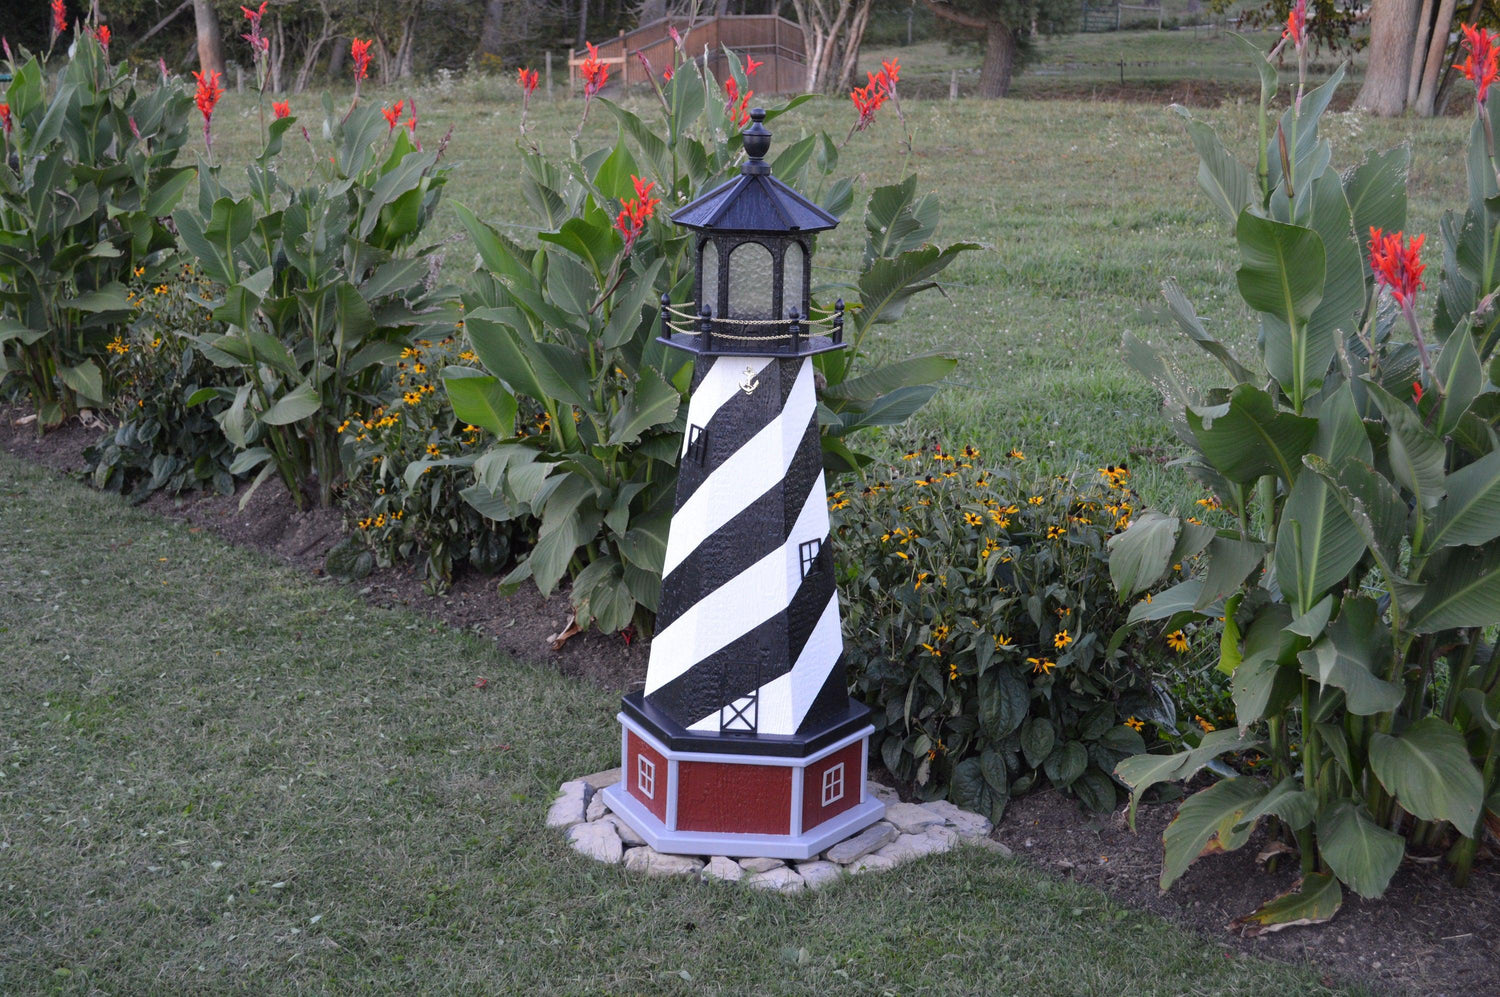 Replica Lighthouse Lawn Ornaments